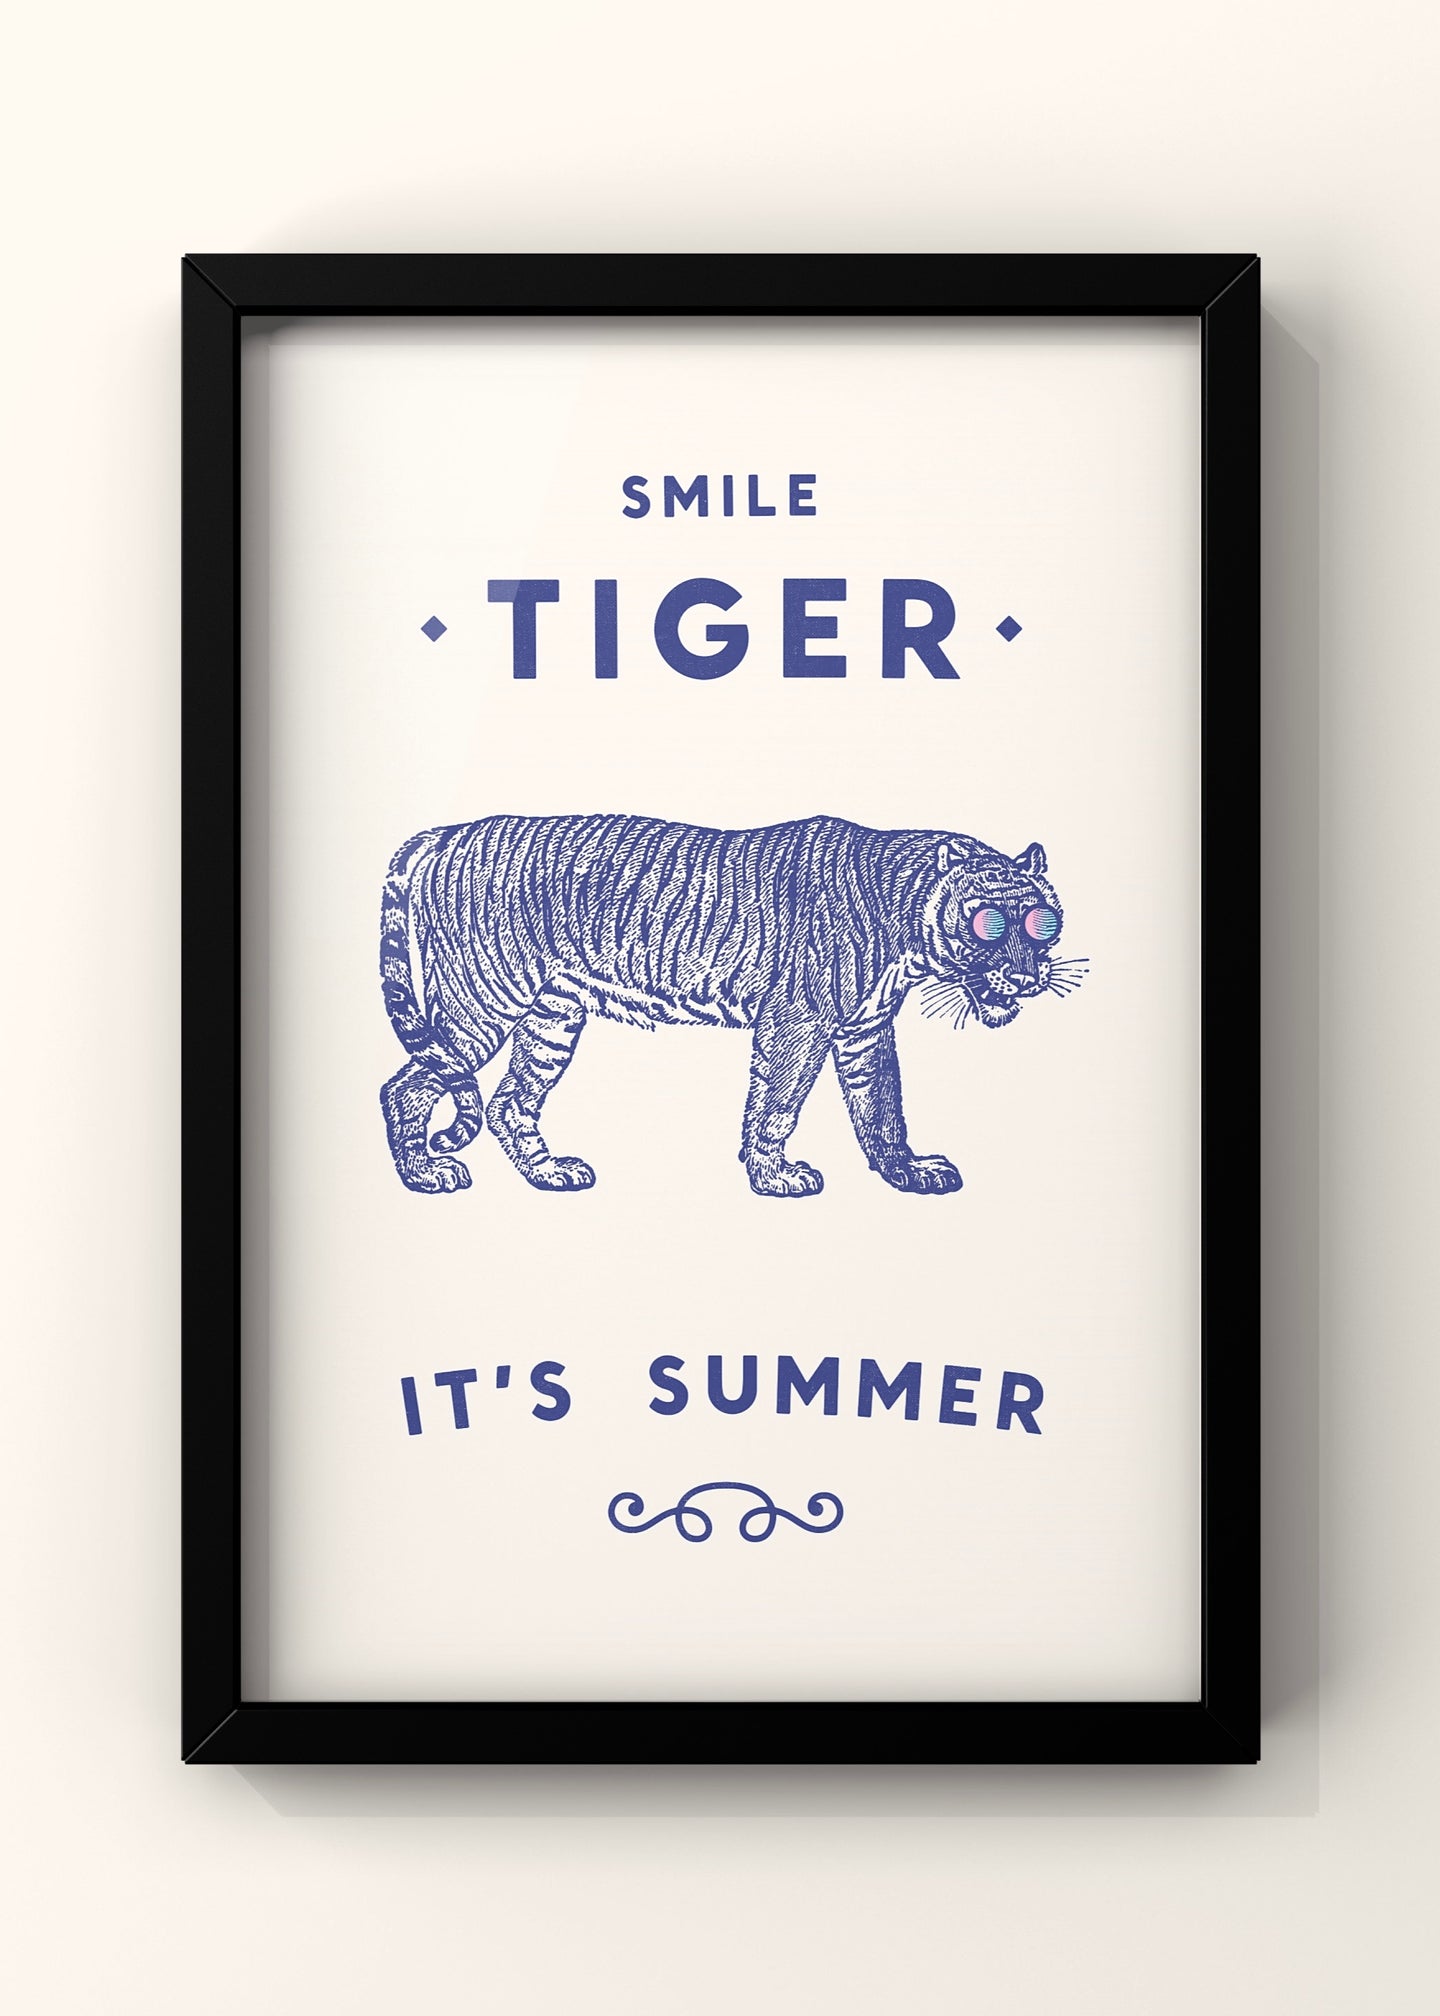 Smile Tiger By Florent Bodart | Animal Quote Wall Art Print